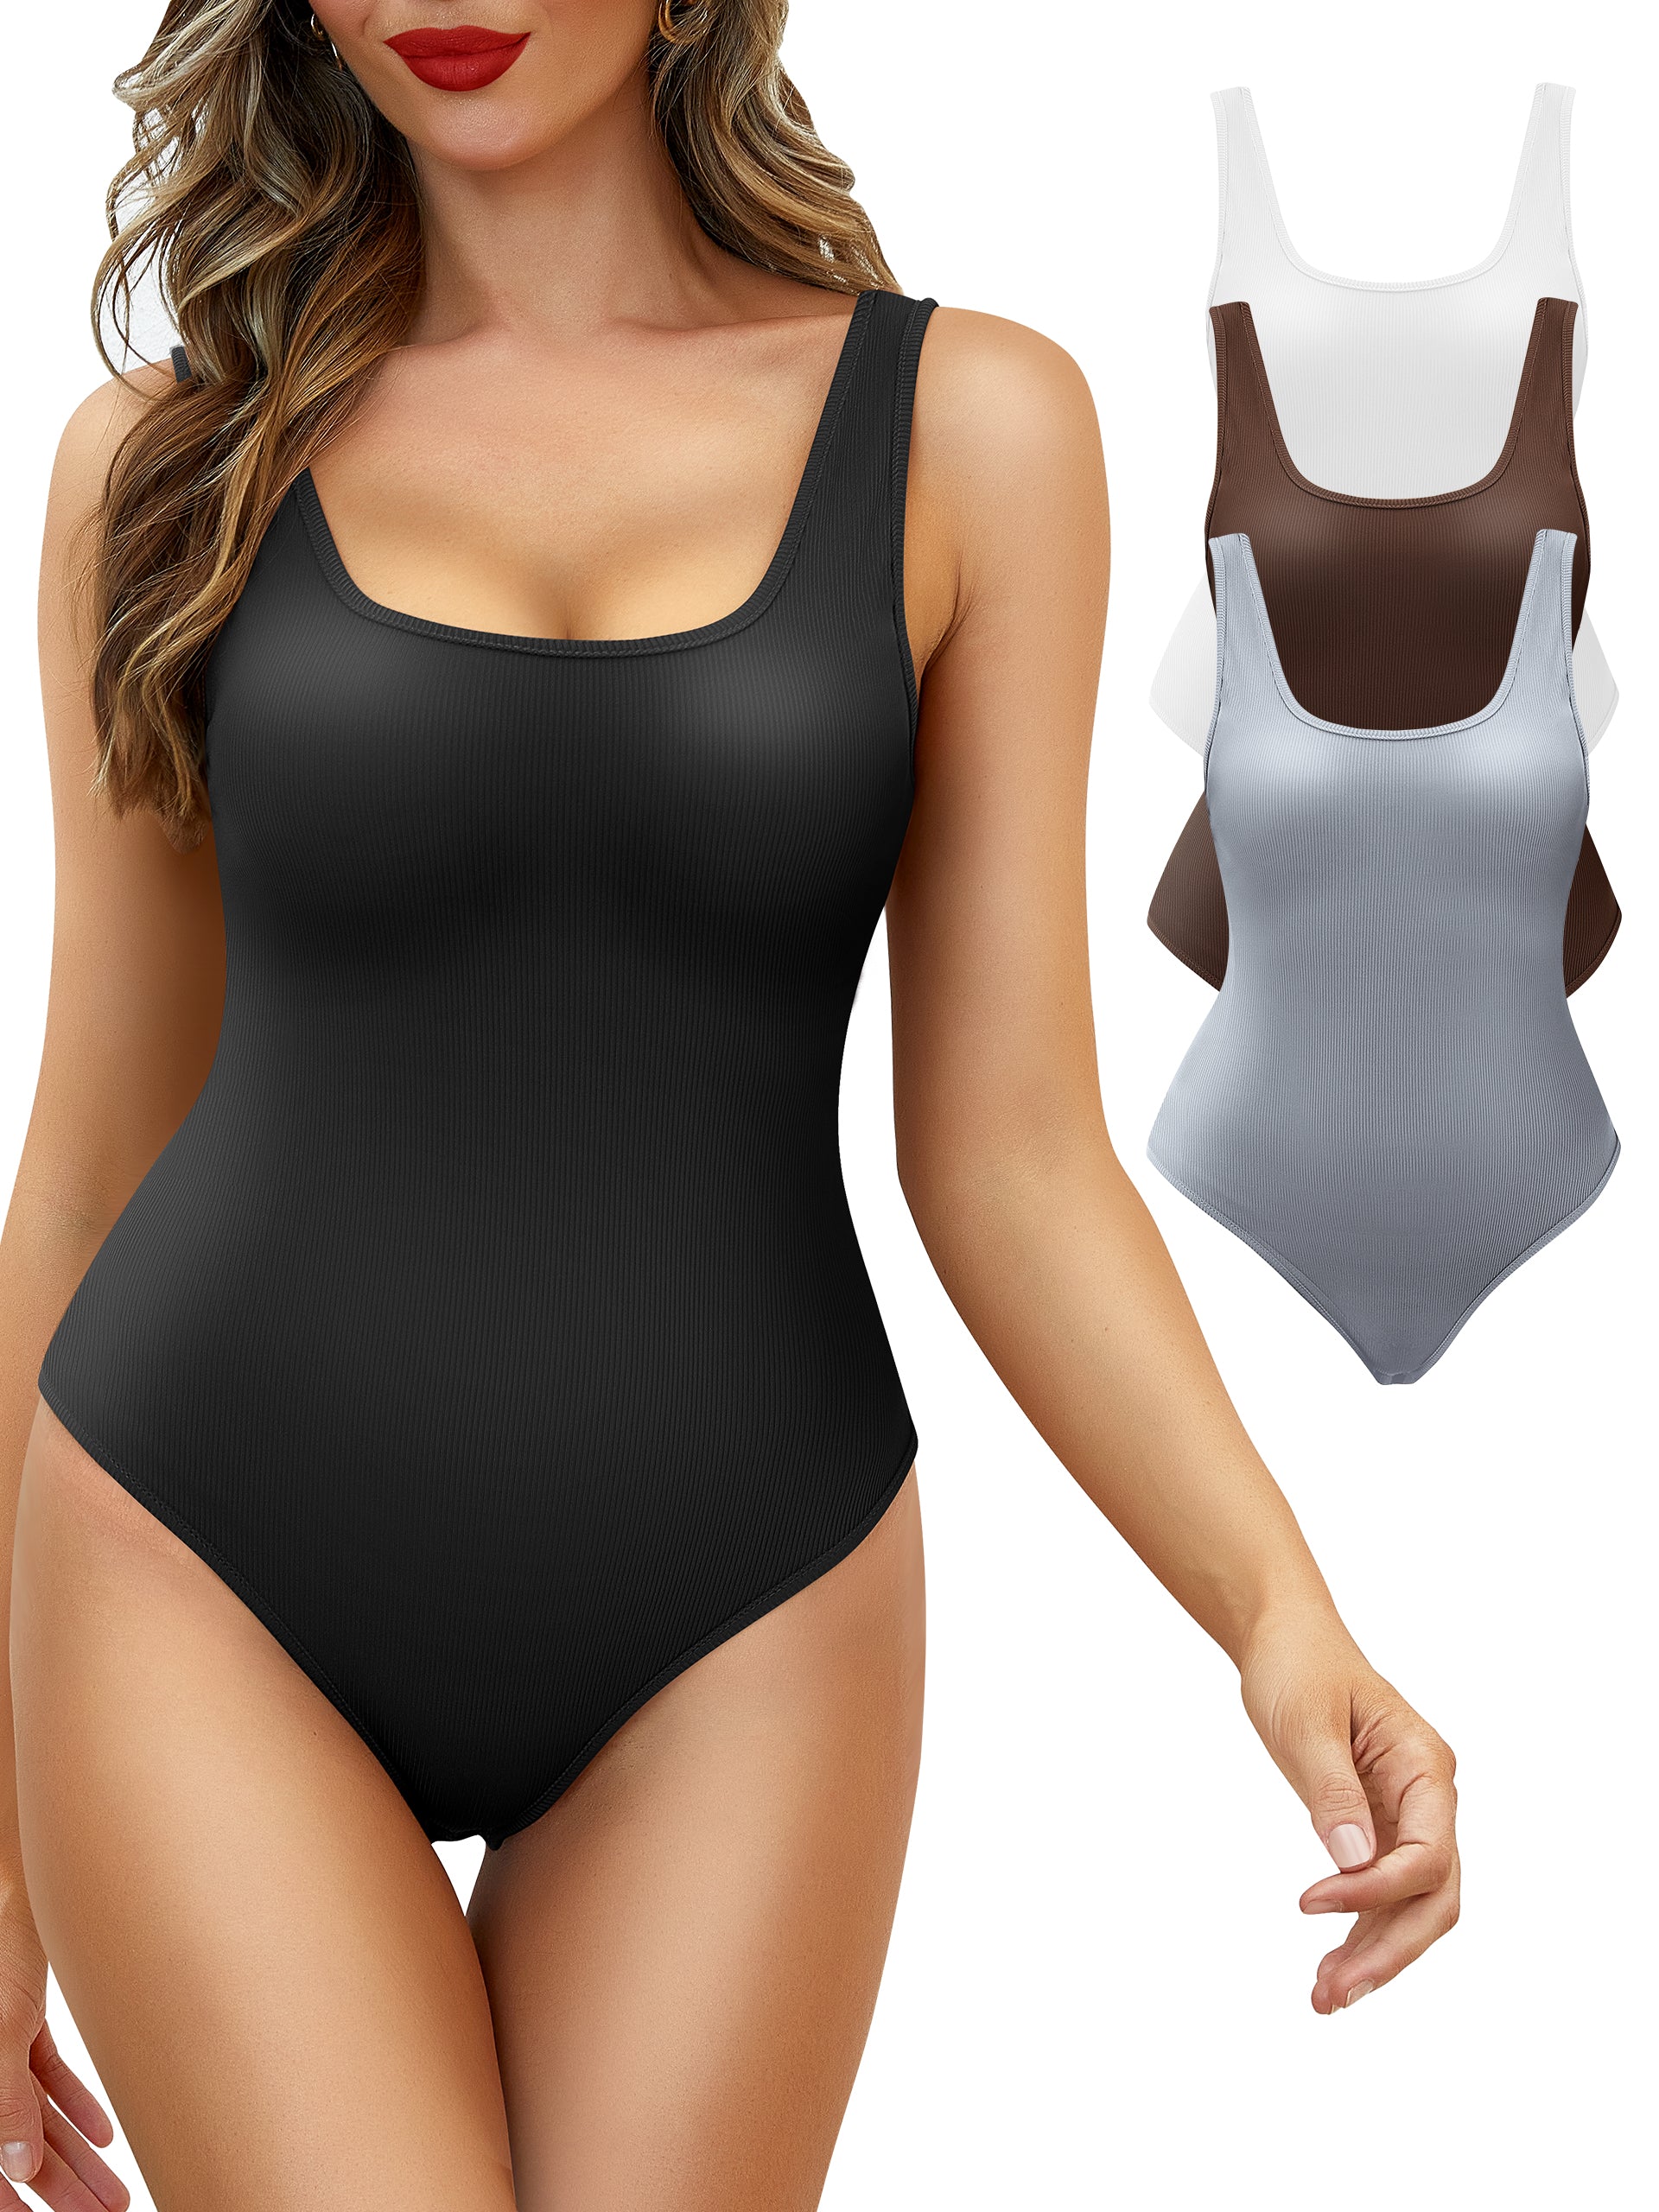 CHARMMA 2 Pack Bodysuit for Women - Square Neck Tank Top Body